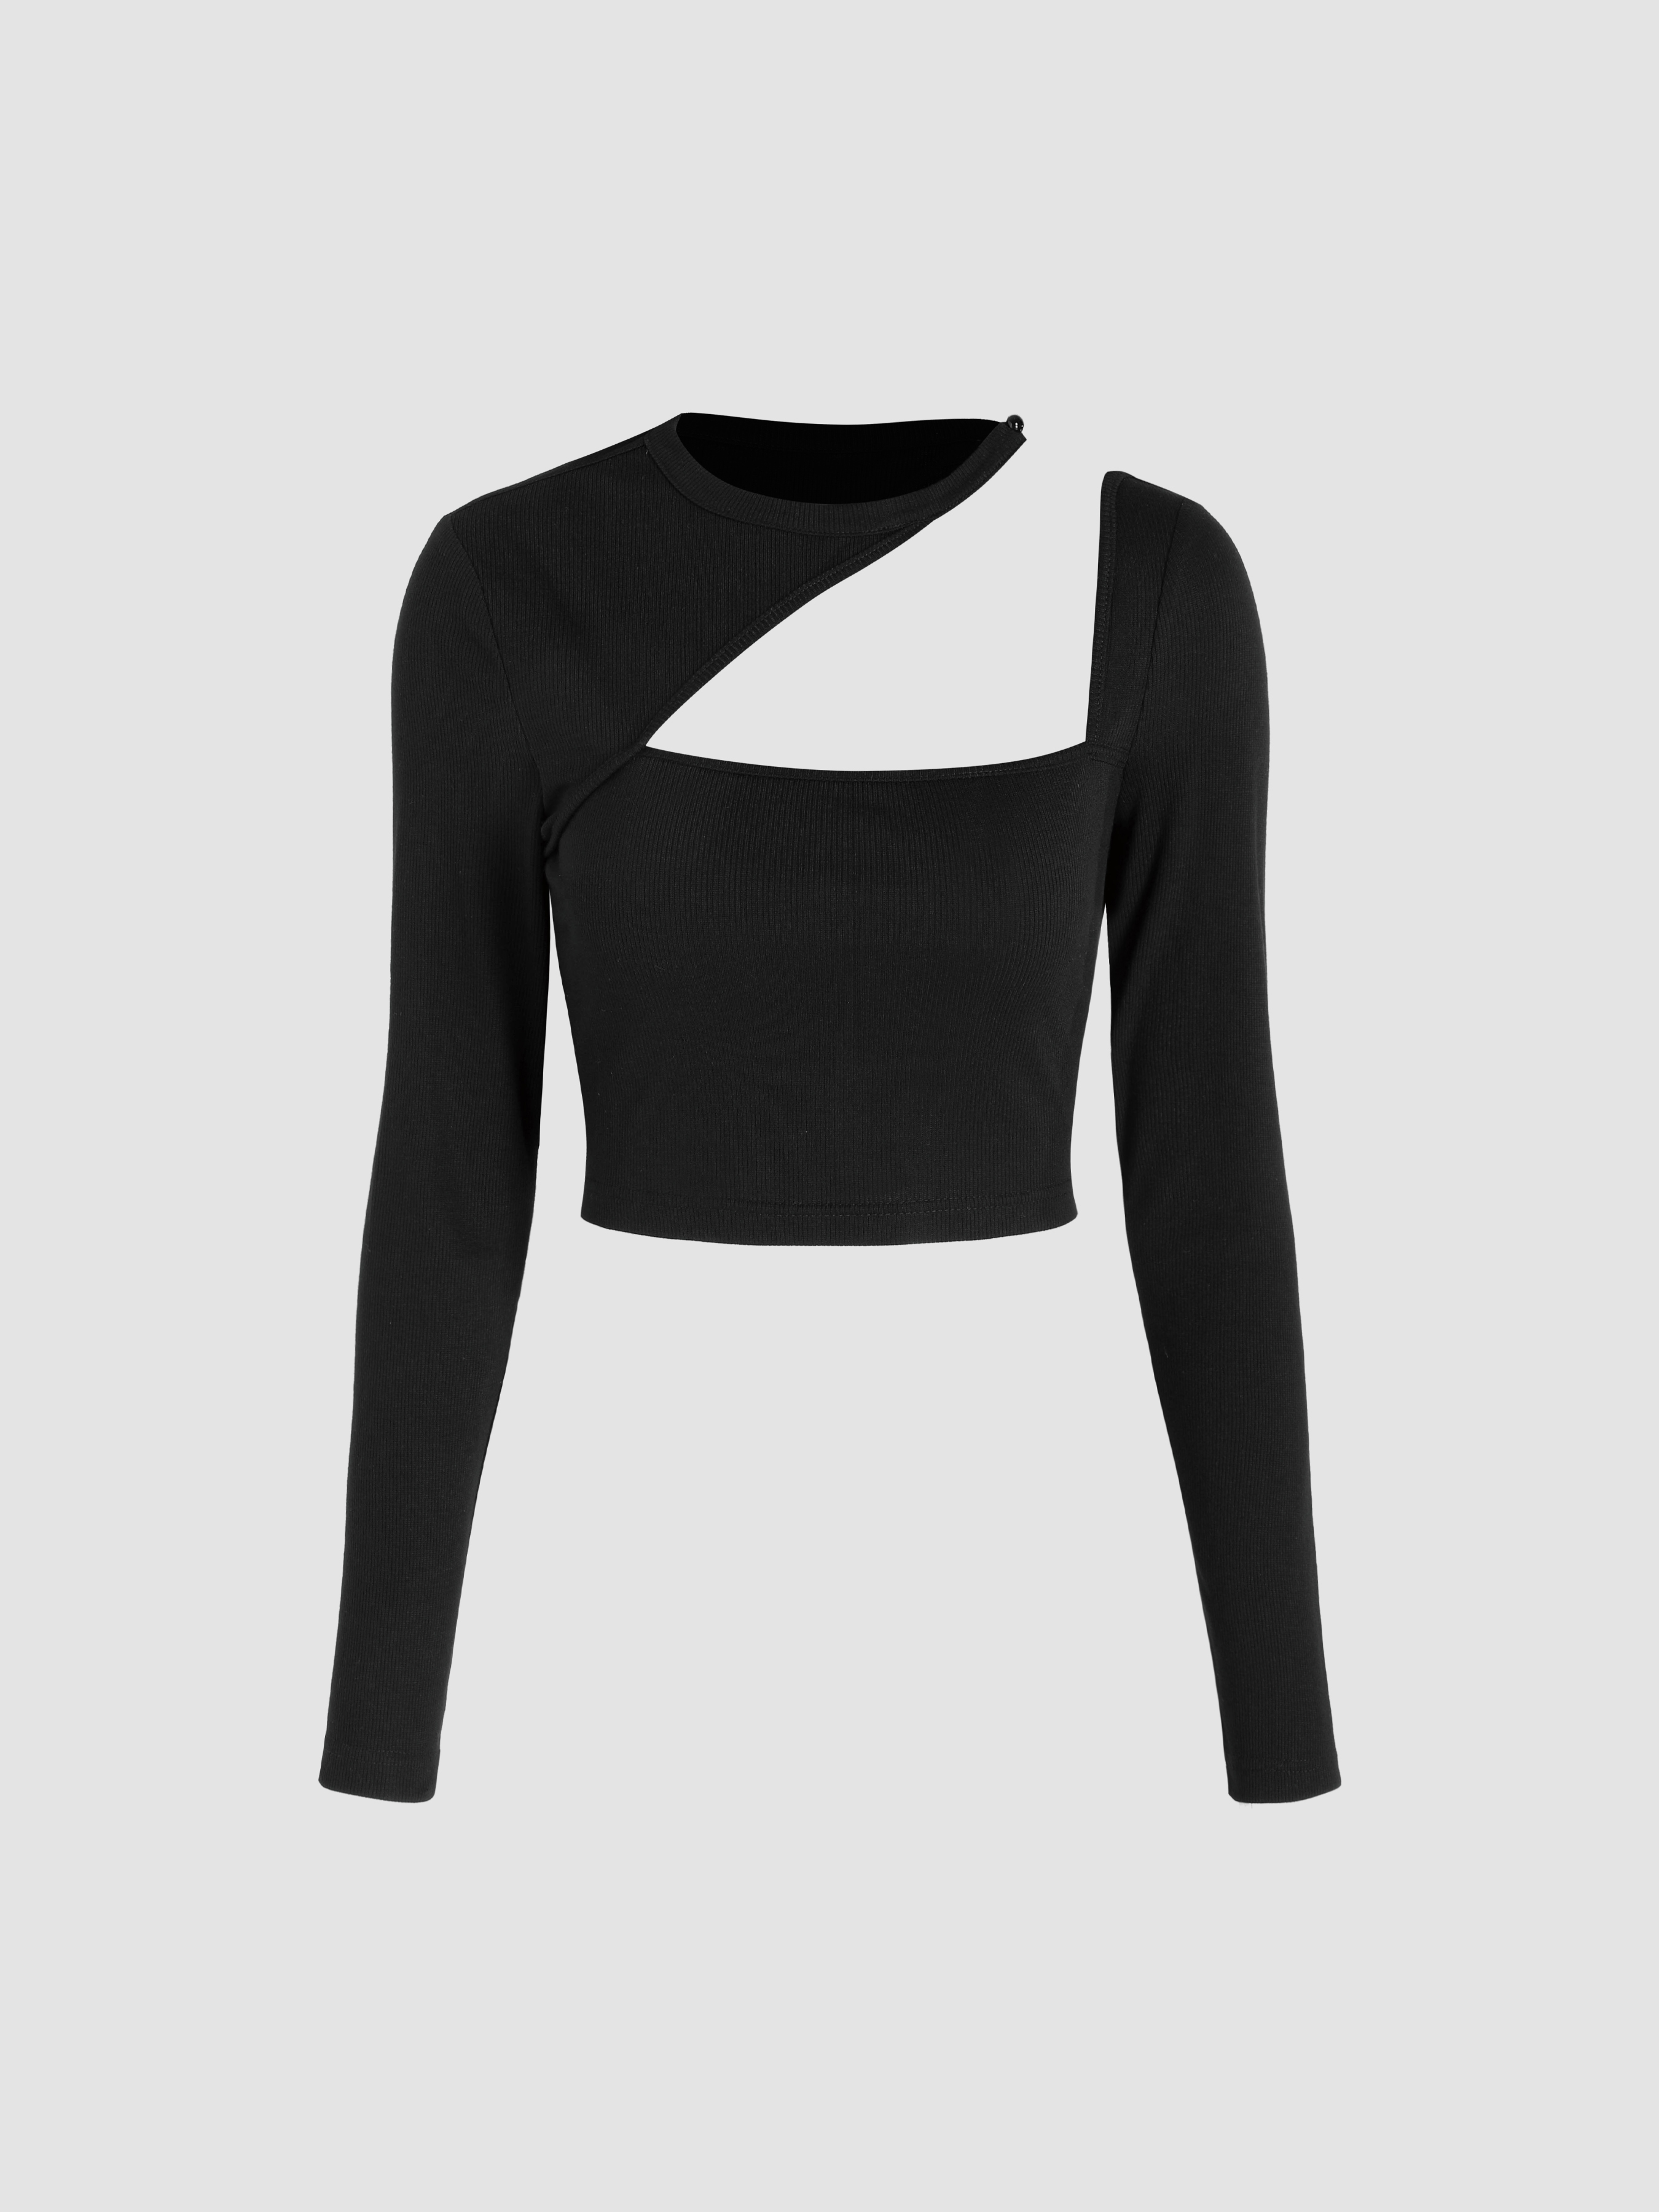 Recycled Fabric Asymmetrical Neck Cut Out Long Sleeve Crop Top - Cider